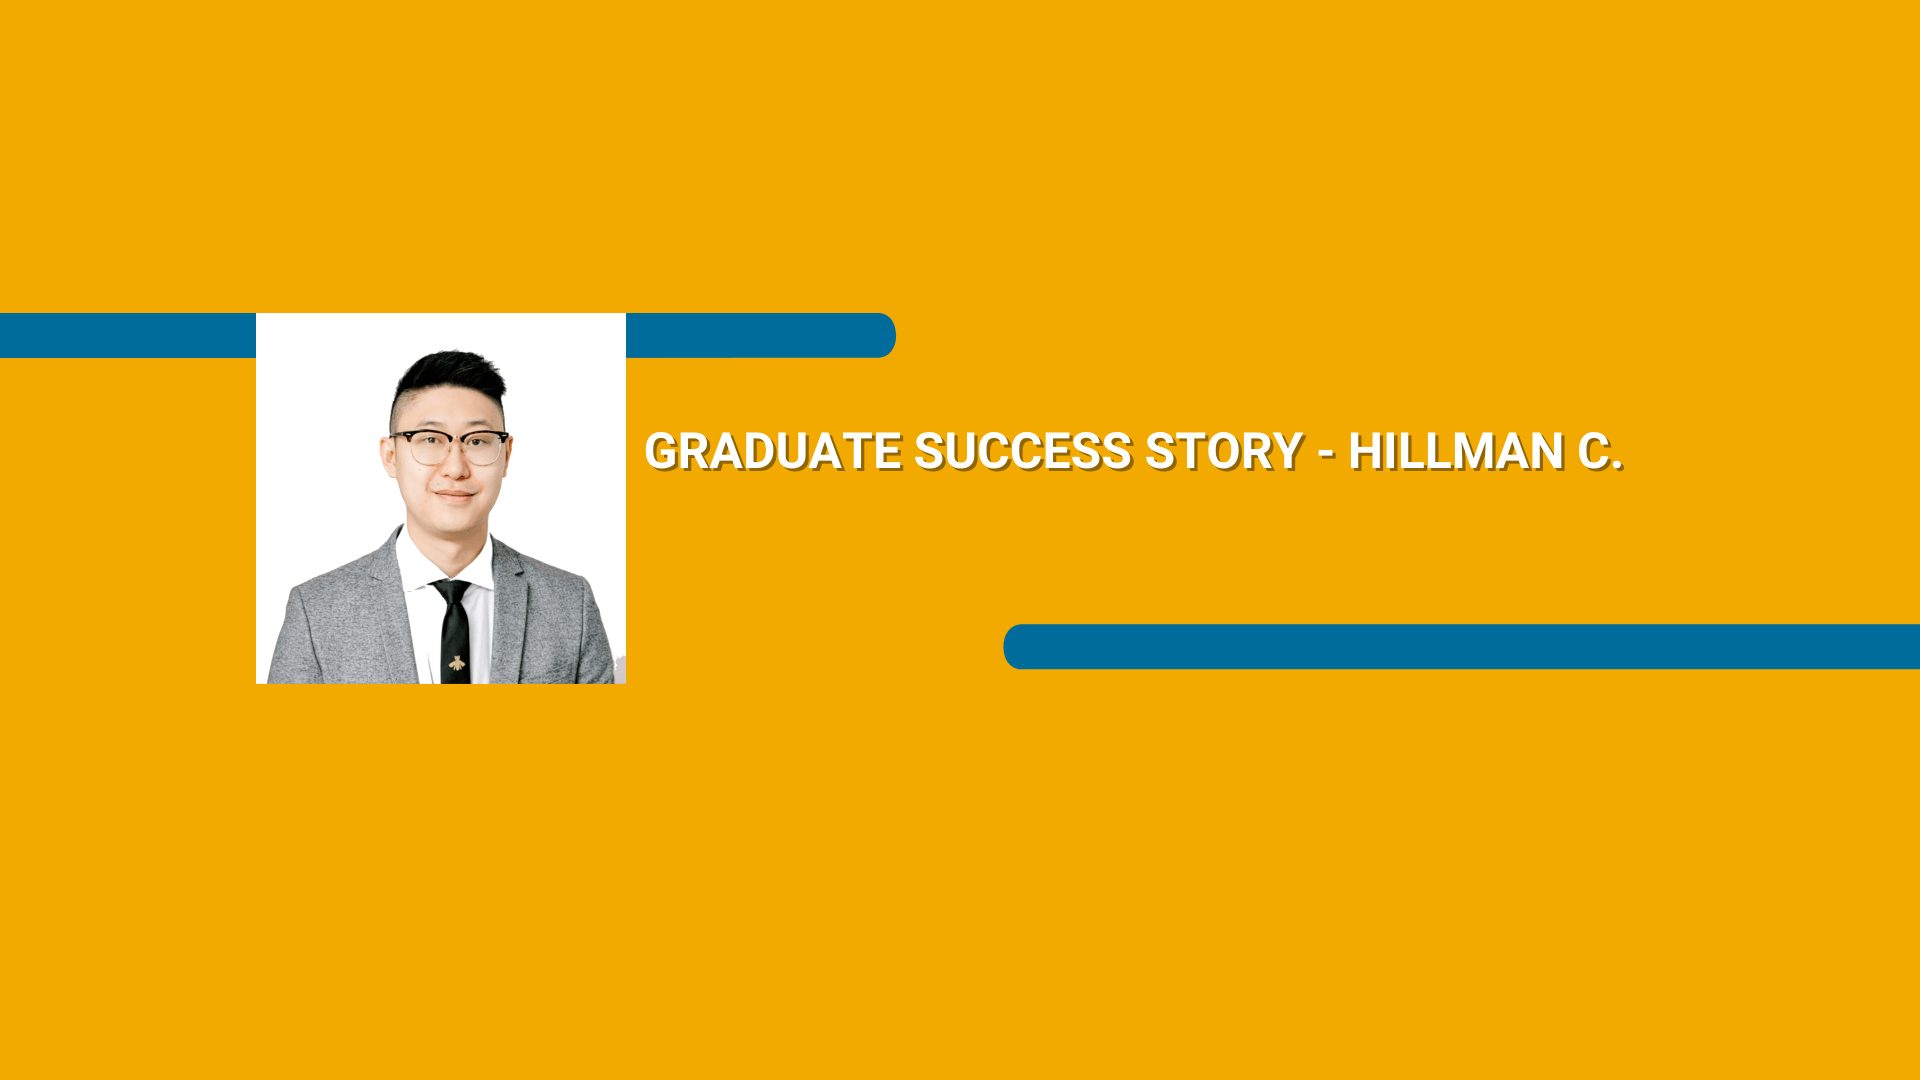 Orange rectangle with a picture of a man wearing a suit and Graduate Success Story - Hillman C. text in white font